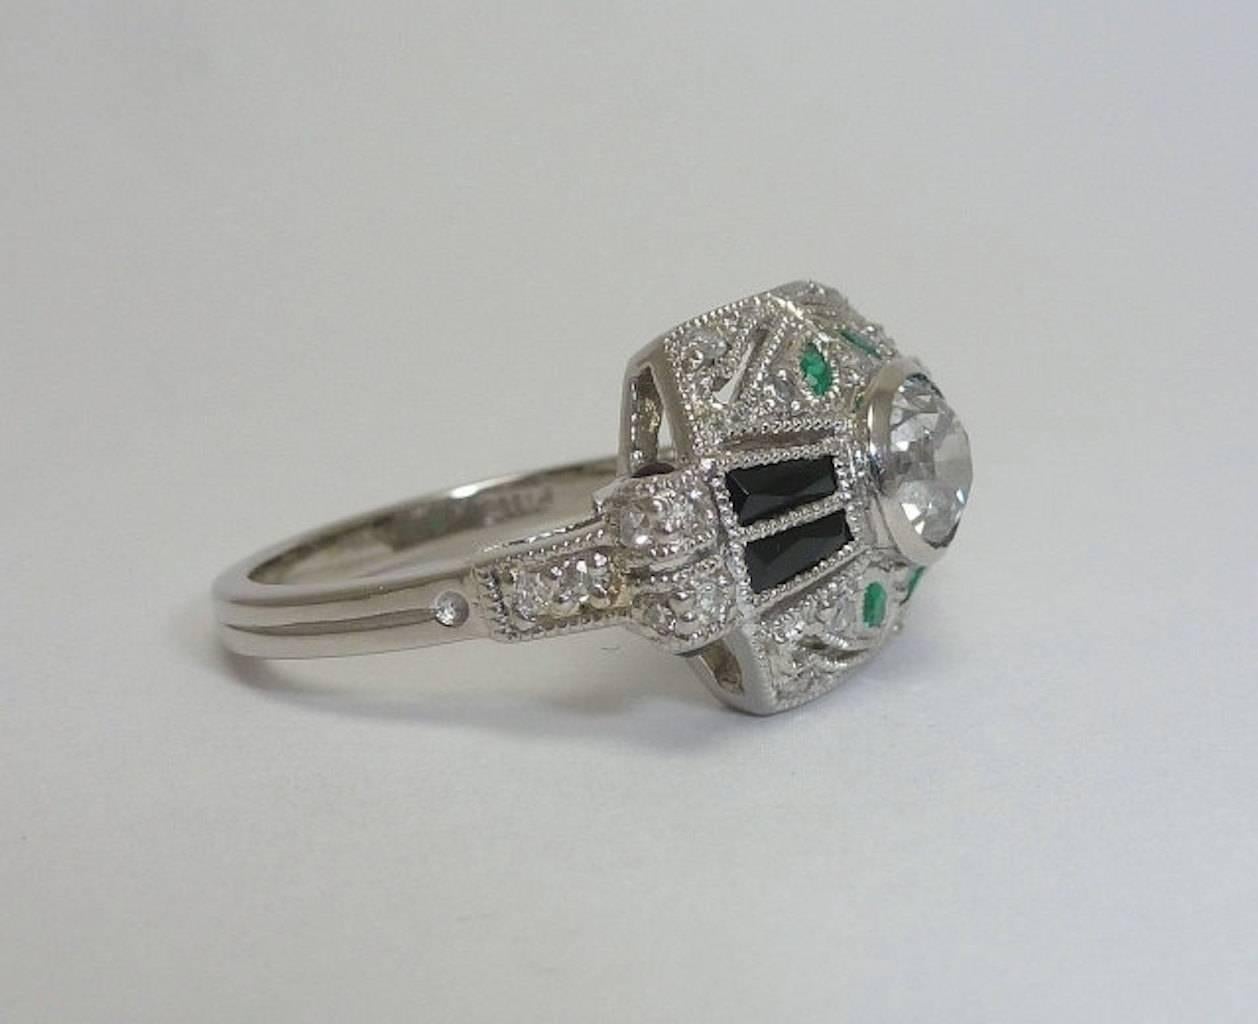 Beacon Hill Jewelers Presents:

An art deco style diamond, onyx, and emerald ring in platinum. This beautiful ring features a center european cut 0.60 carat diamond surrounded by French cut Onyx baguettes, marquise cut emeralds, and sparkling